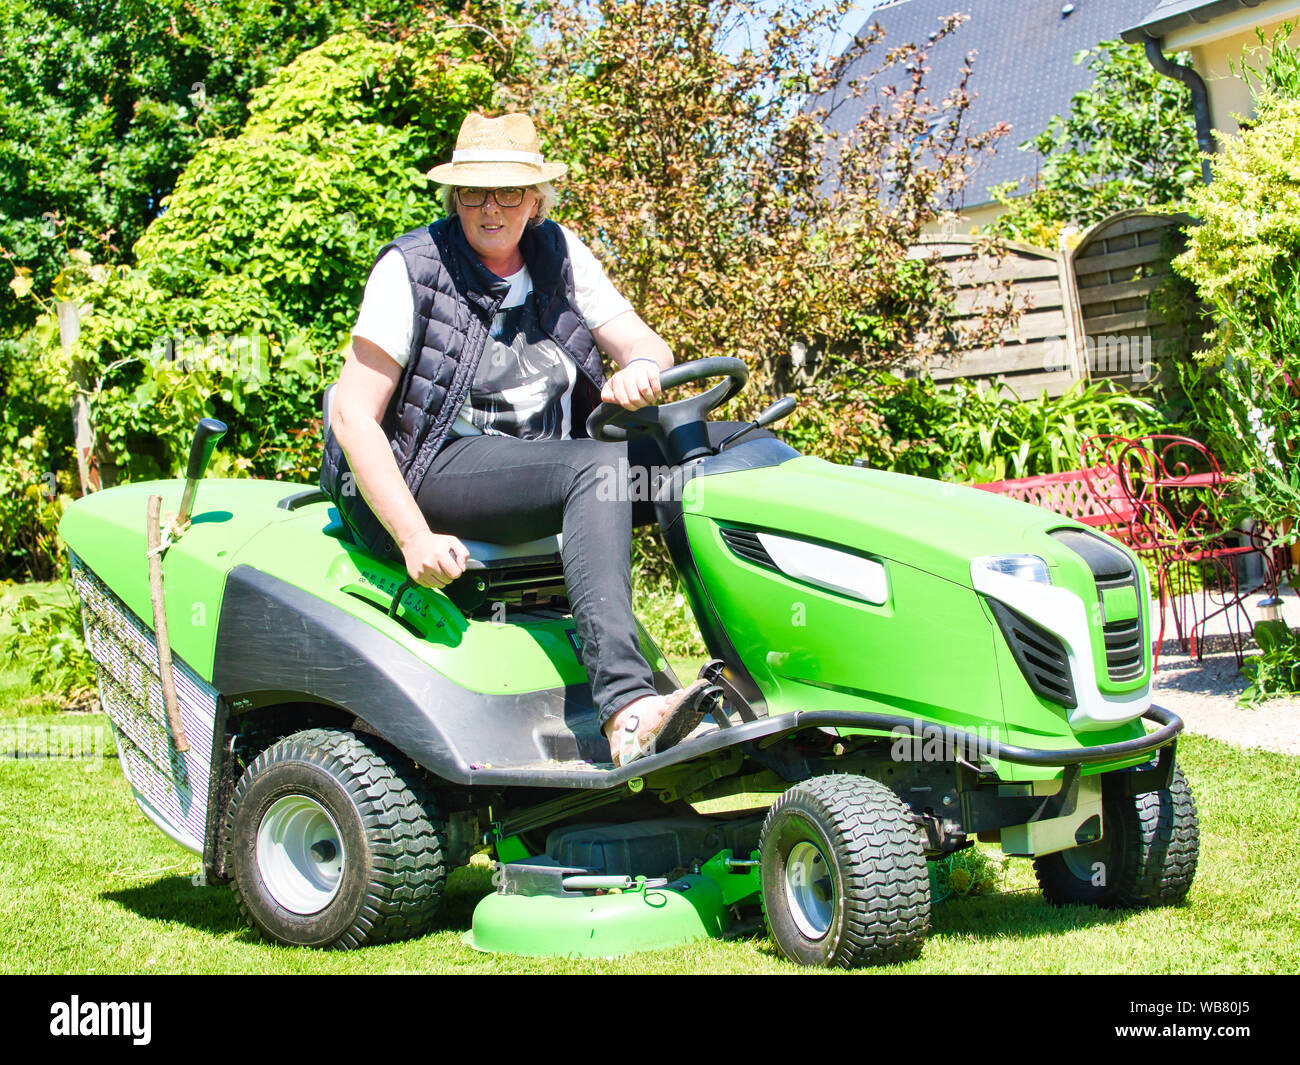 Mature Woman With Hat Driving A Tractor Lawn Mower In Garden With